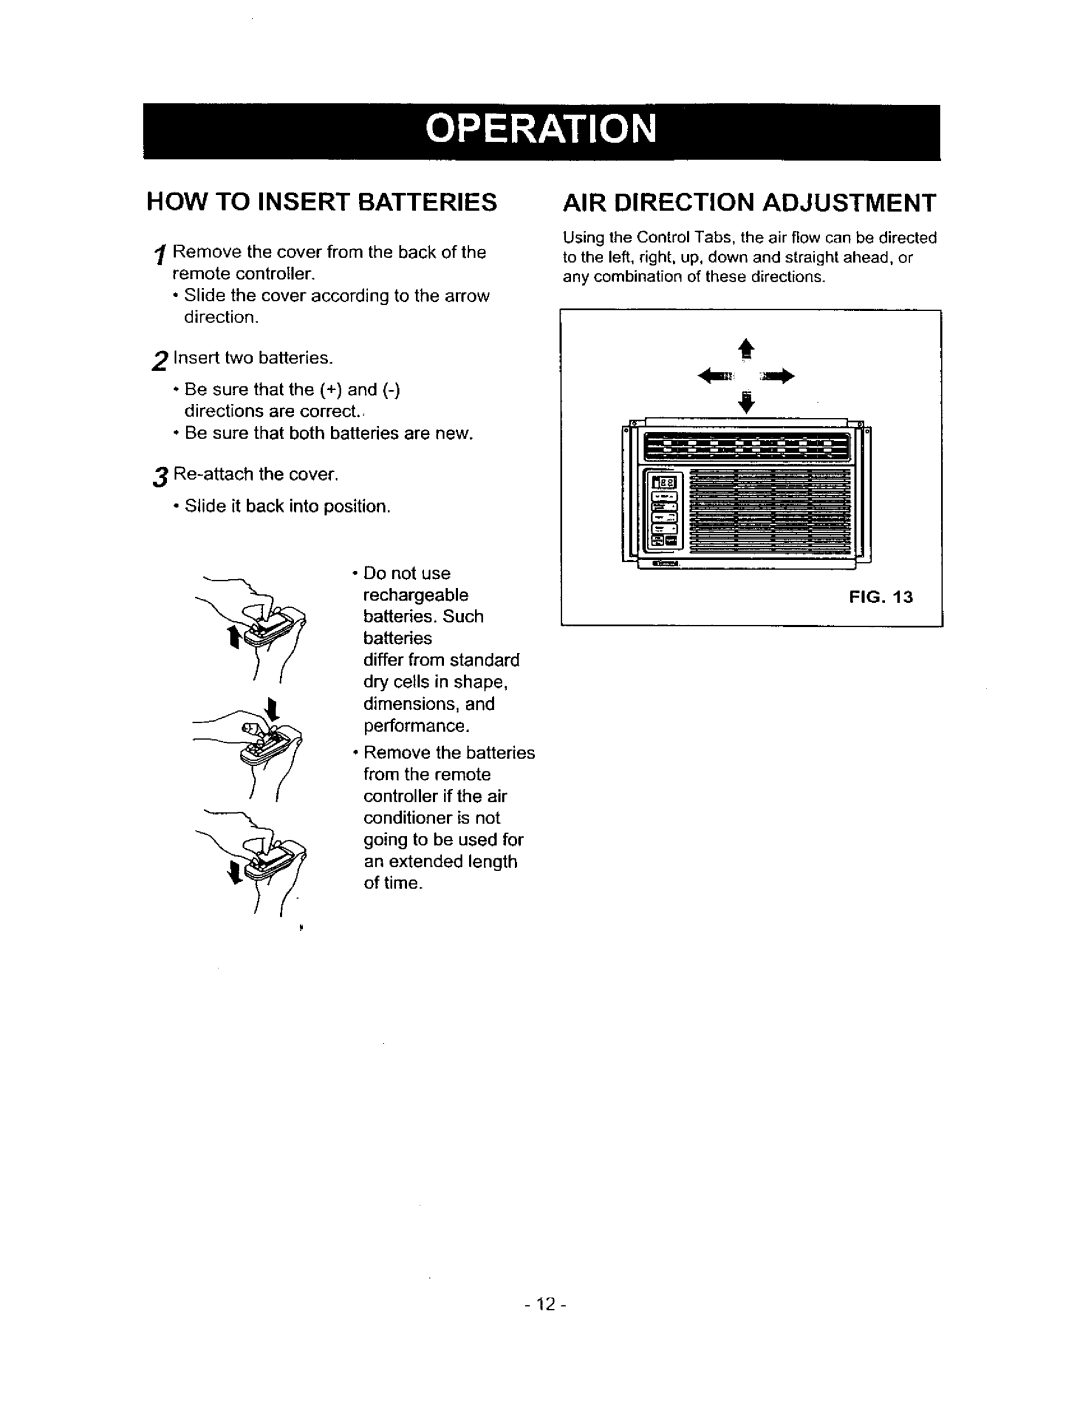 Kenmore 580.71056 owner manual How To Insert Batteries, Air Direction Adjustment 